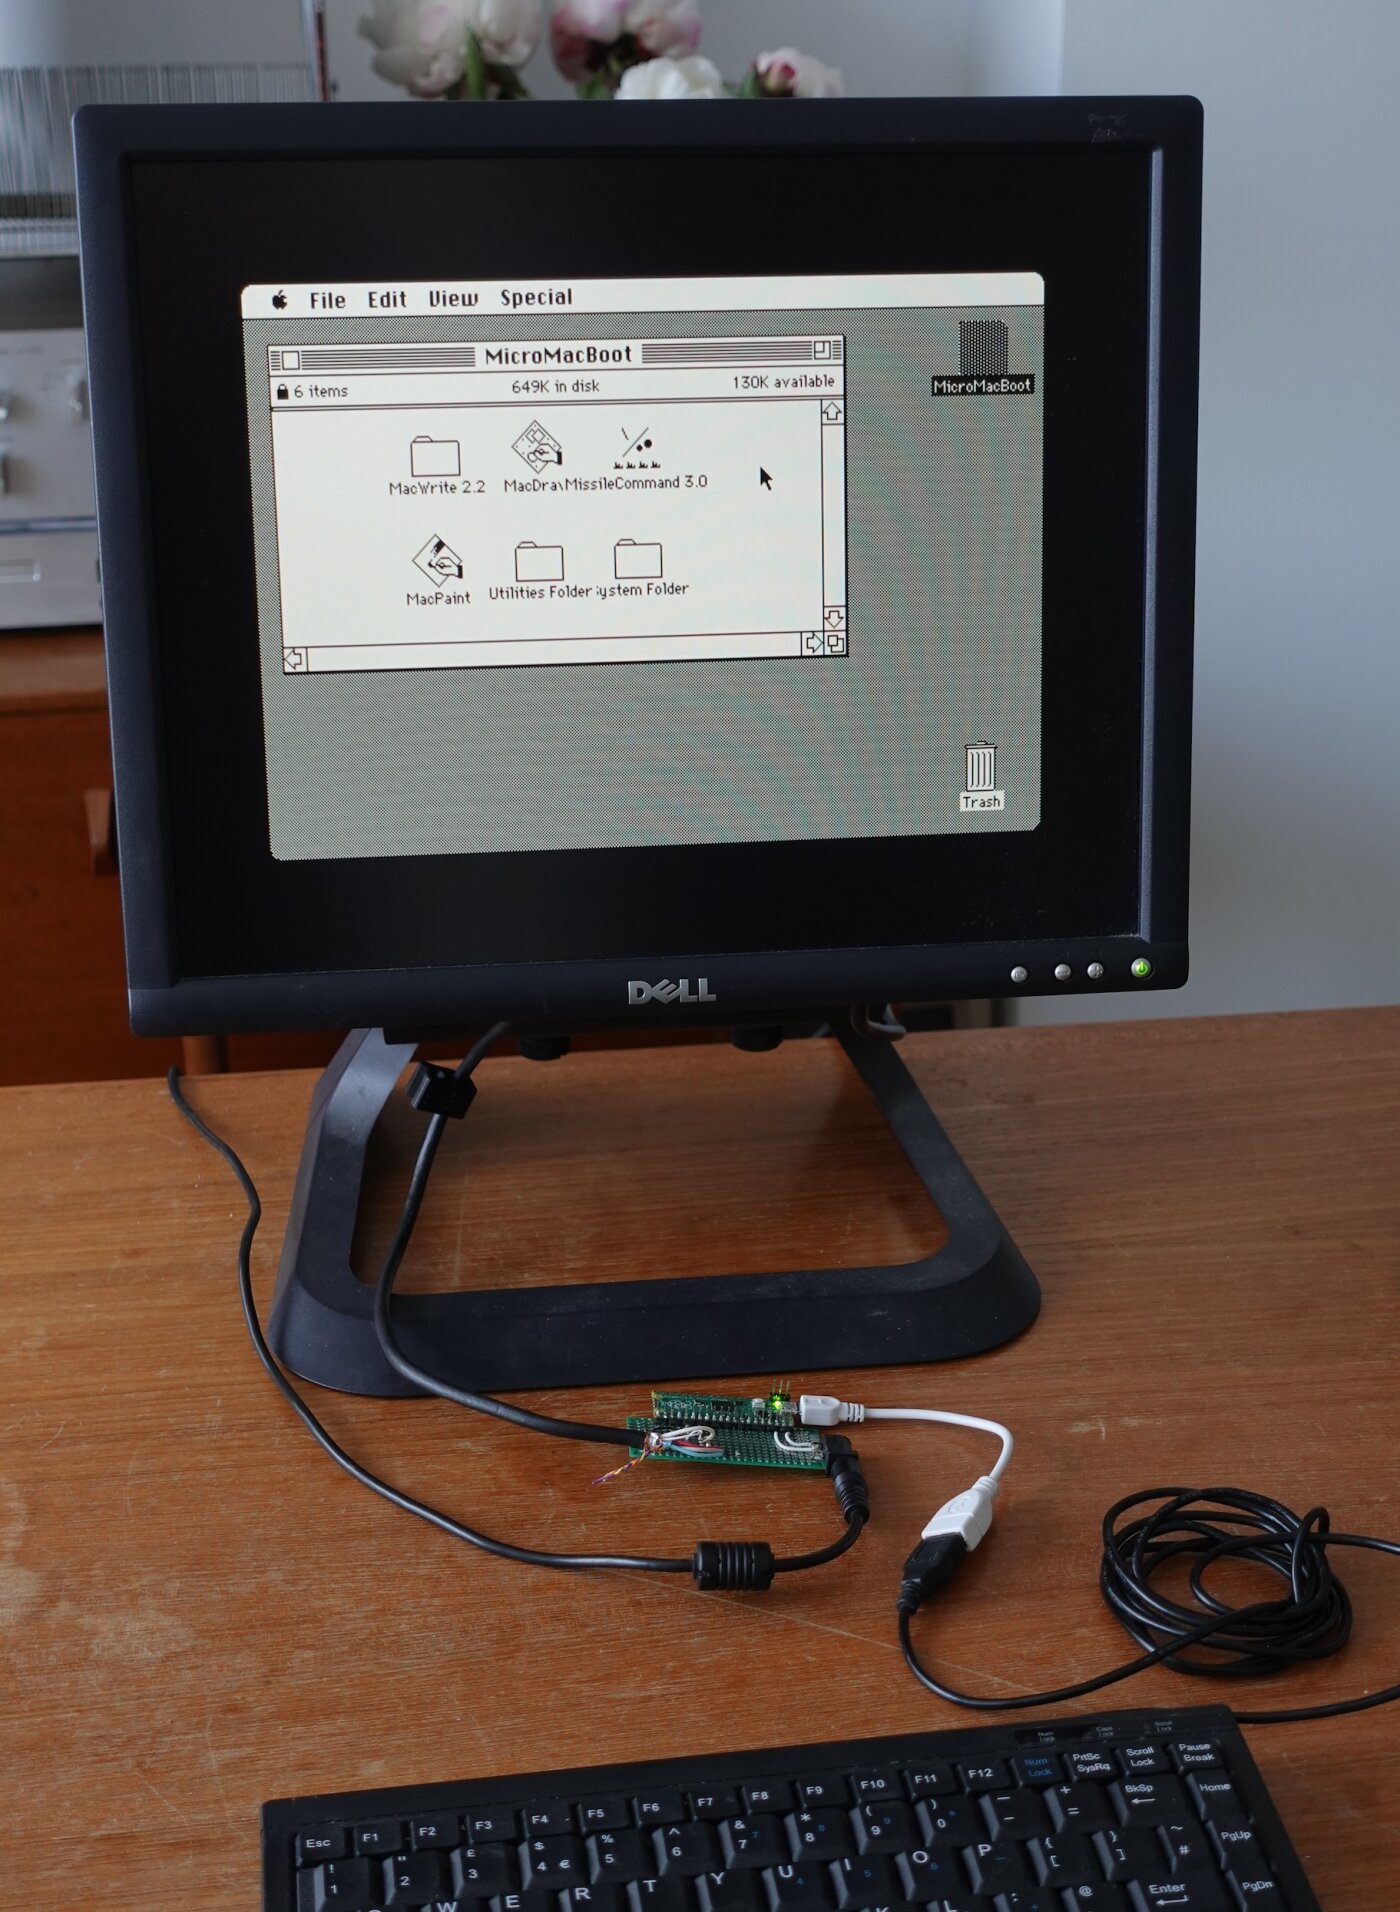  The Pico MicroMac RISC CISC workstation of the future